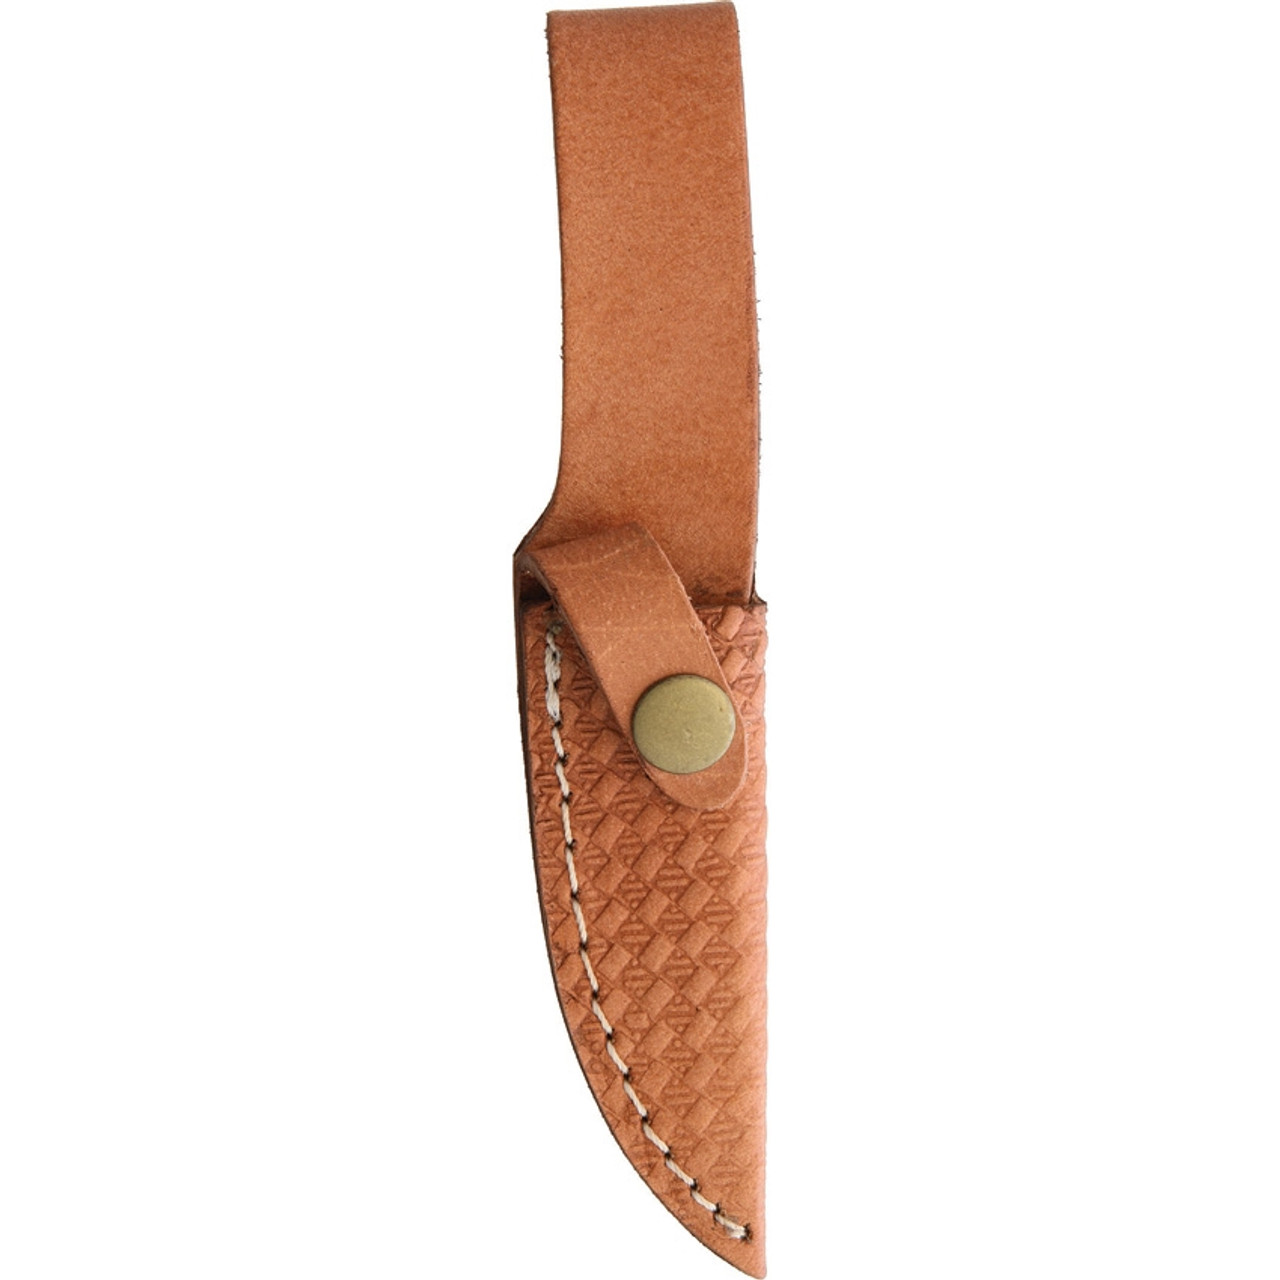 Rough Ryder Short Skinner Leather Wrapped, RR1636, 3.5" Satin Stainless Skinner Blade, Brown Stacked Leather Handle